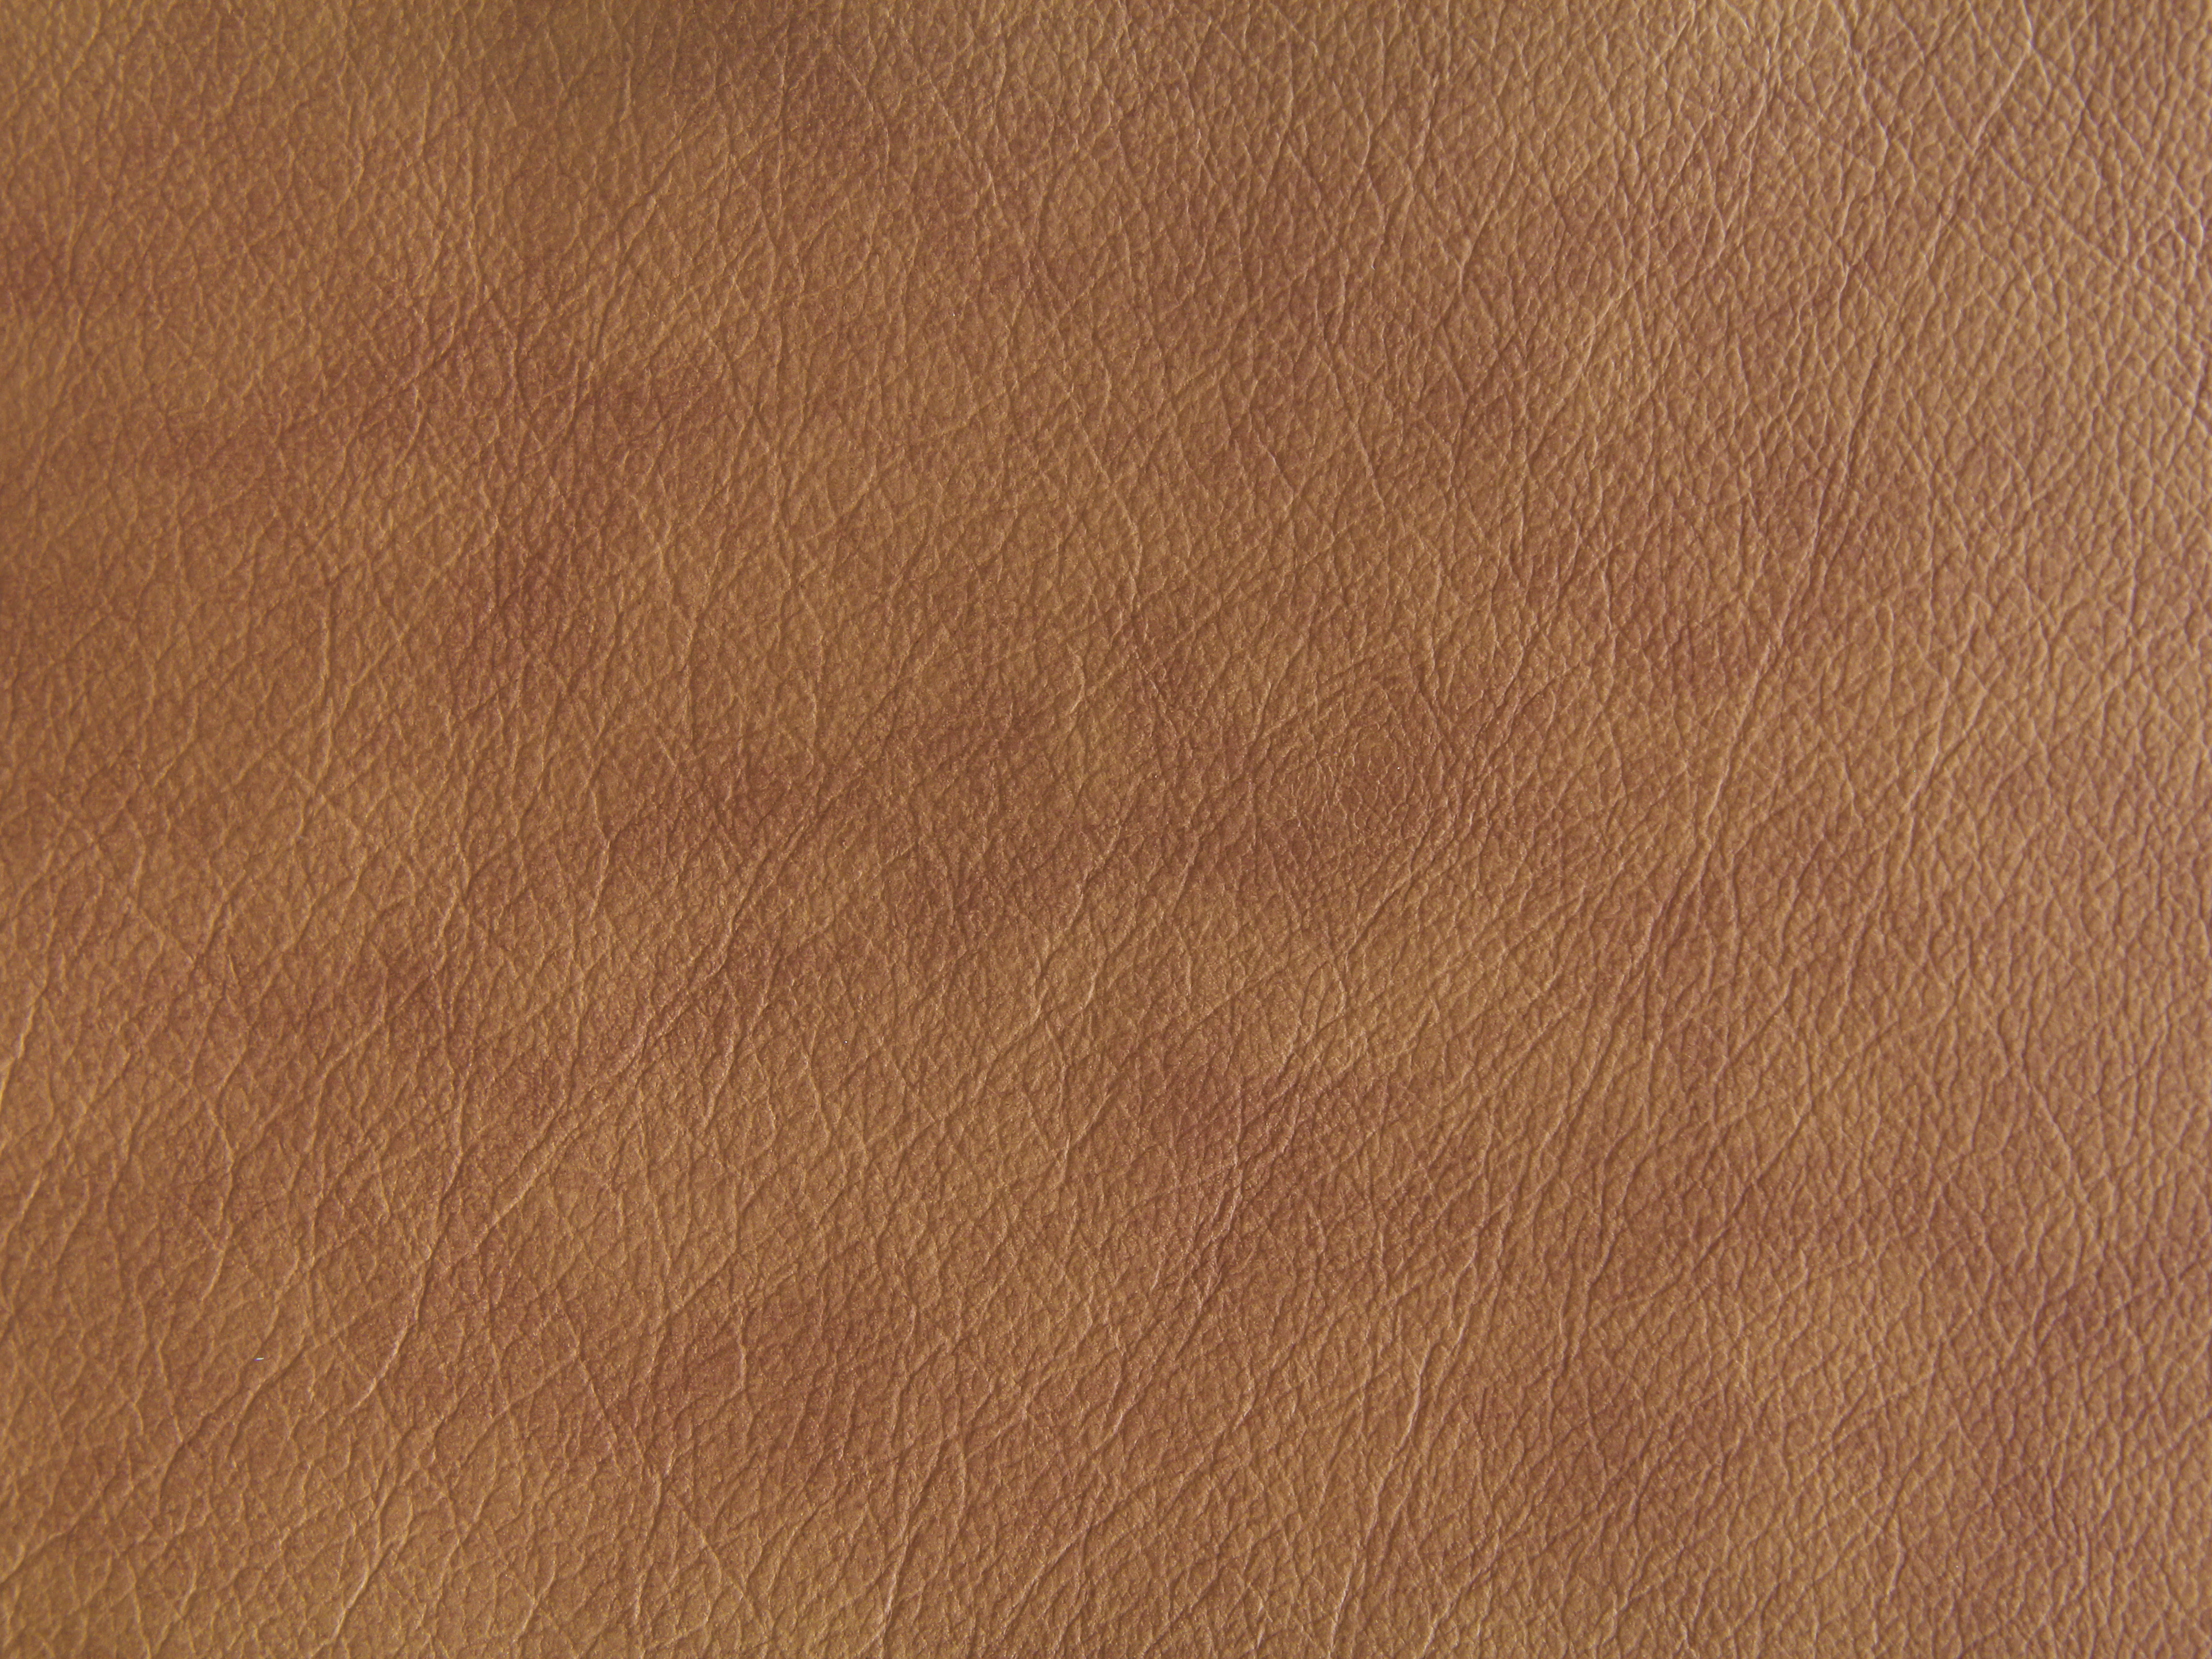 Coudy Brown Leather Texture Wallpaper Fabric Stock Image Design Jpg